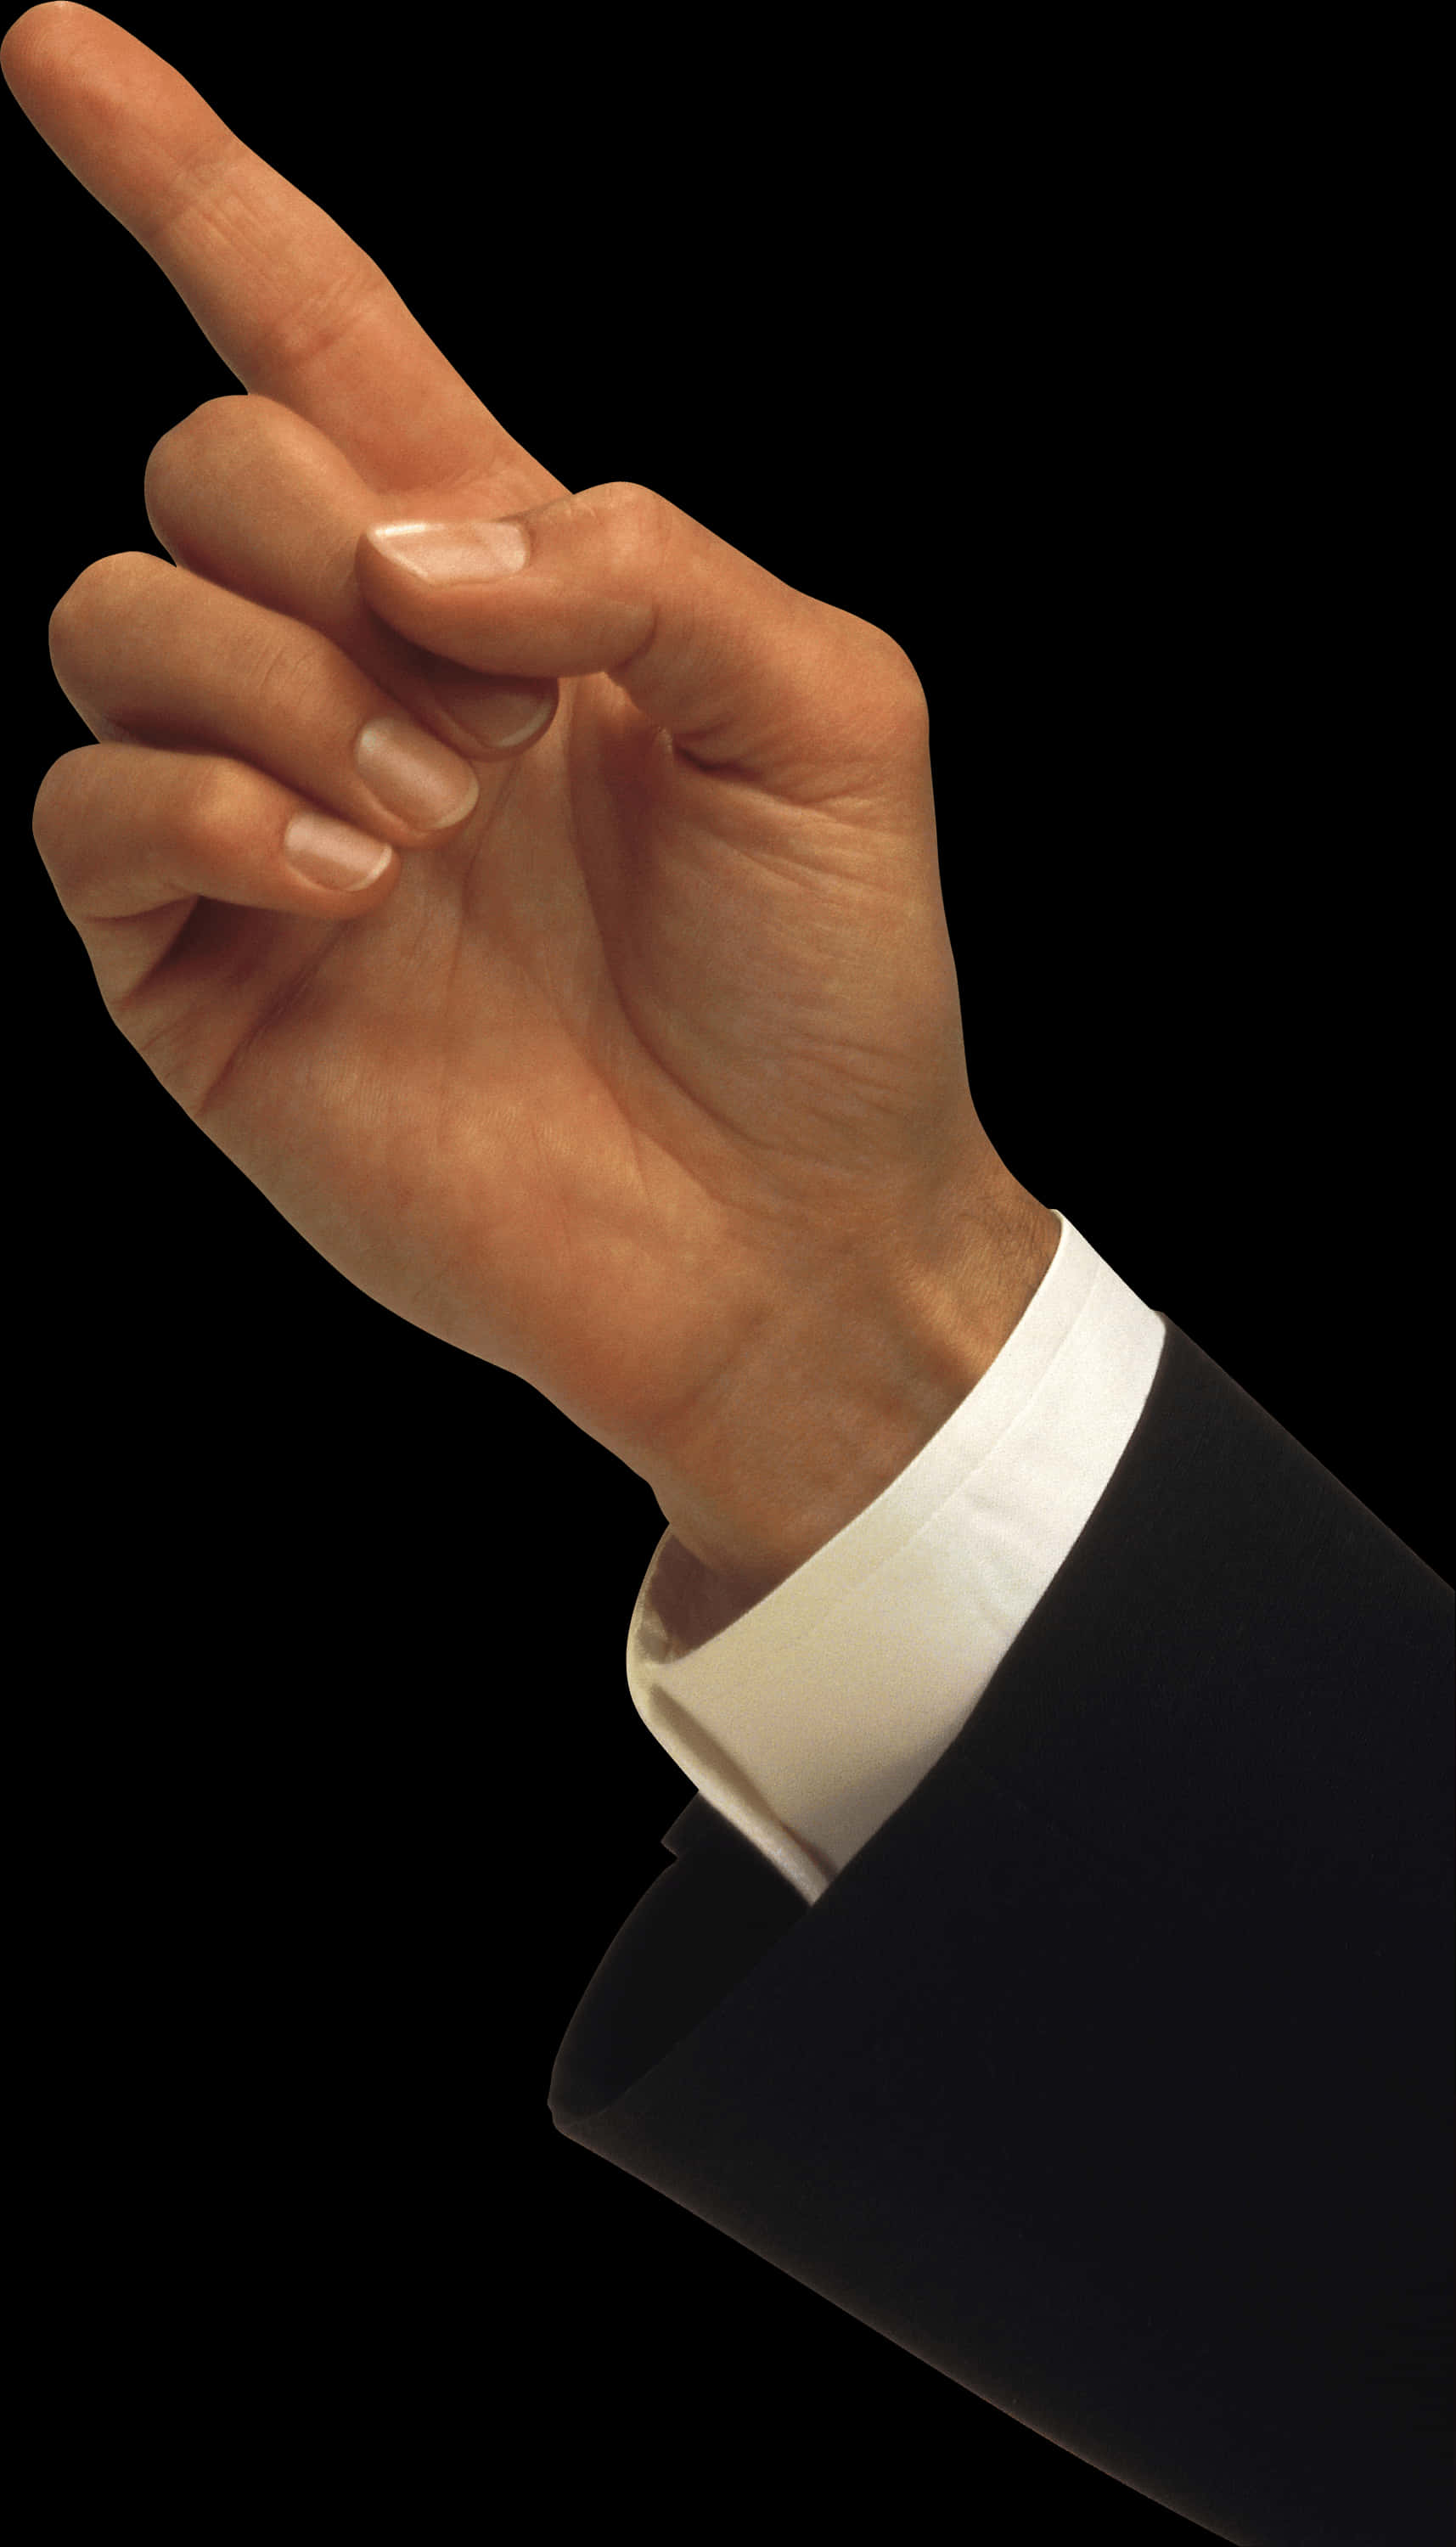 Pointing Hand Gesture Black Background PNG image